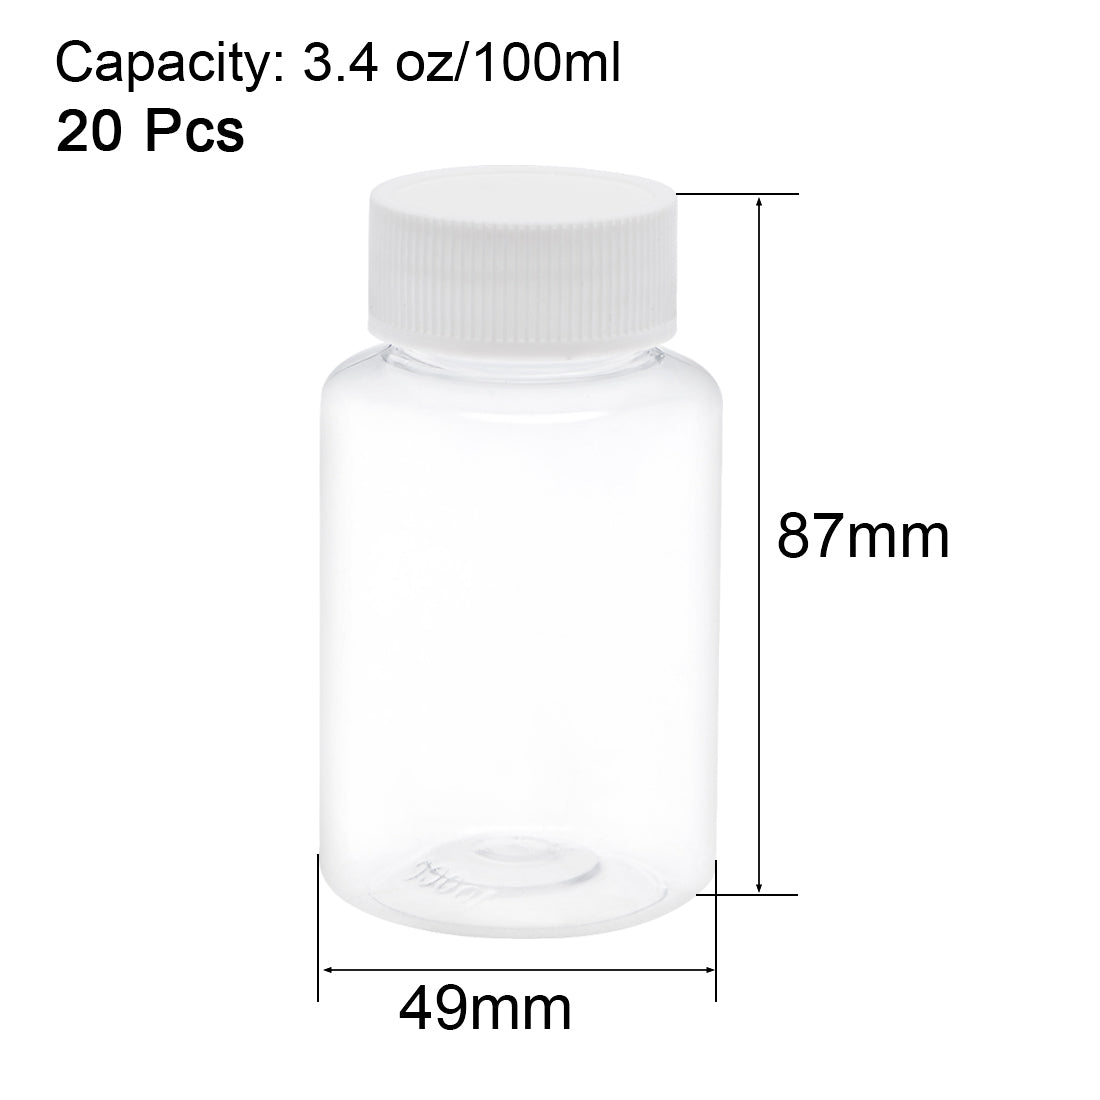 Uxcell Uxcell 3.4 oz/100ml PET Plastic Lab Chemical Reagent Bottle Wide Mouth Liquid/ Solid Storage Container Clear Bottles w Tamper Evident Caps 20pcs